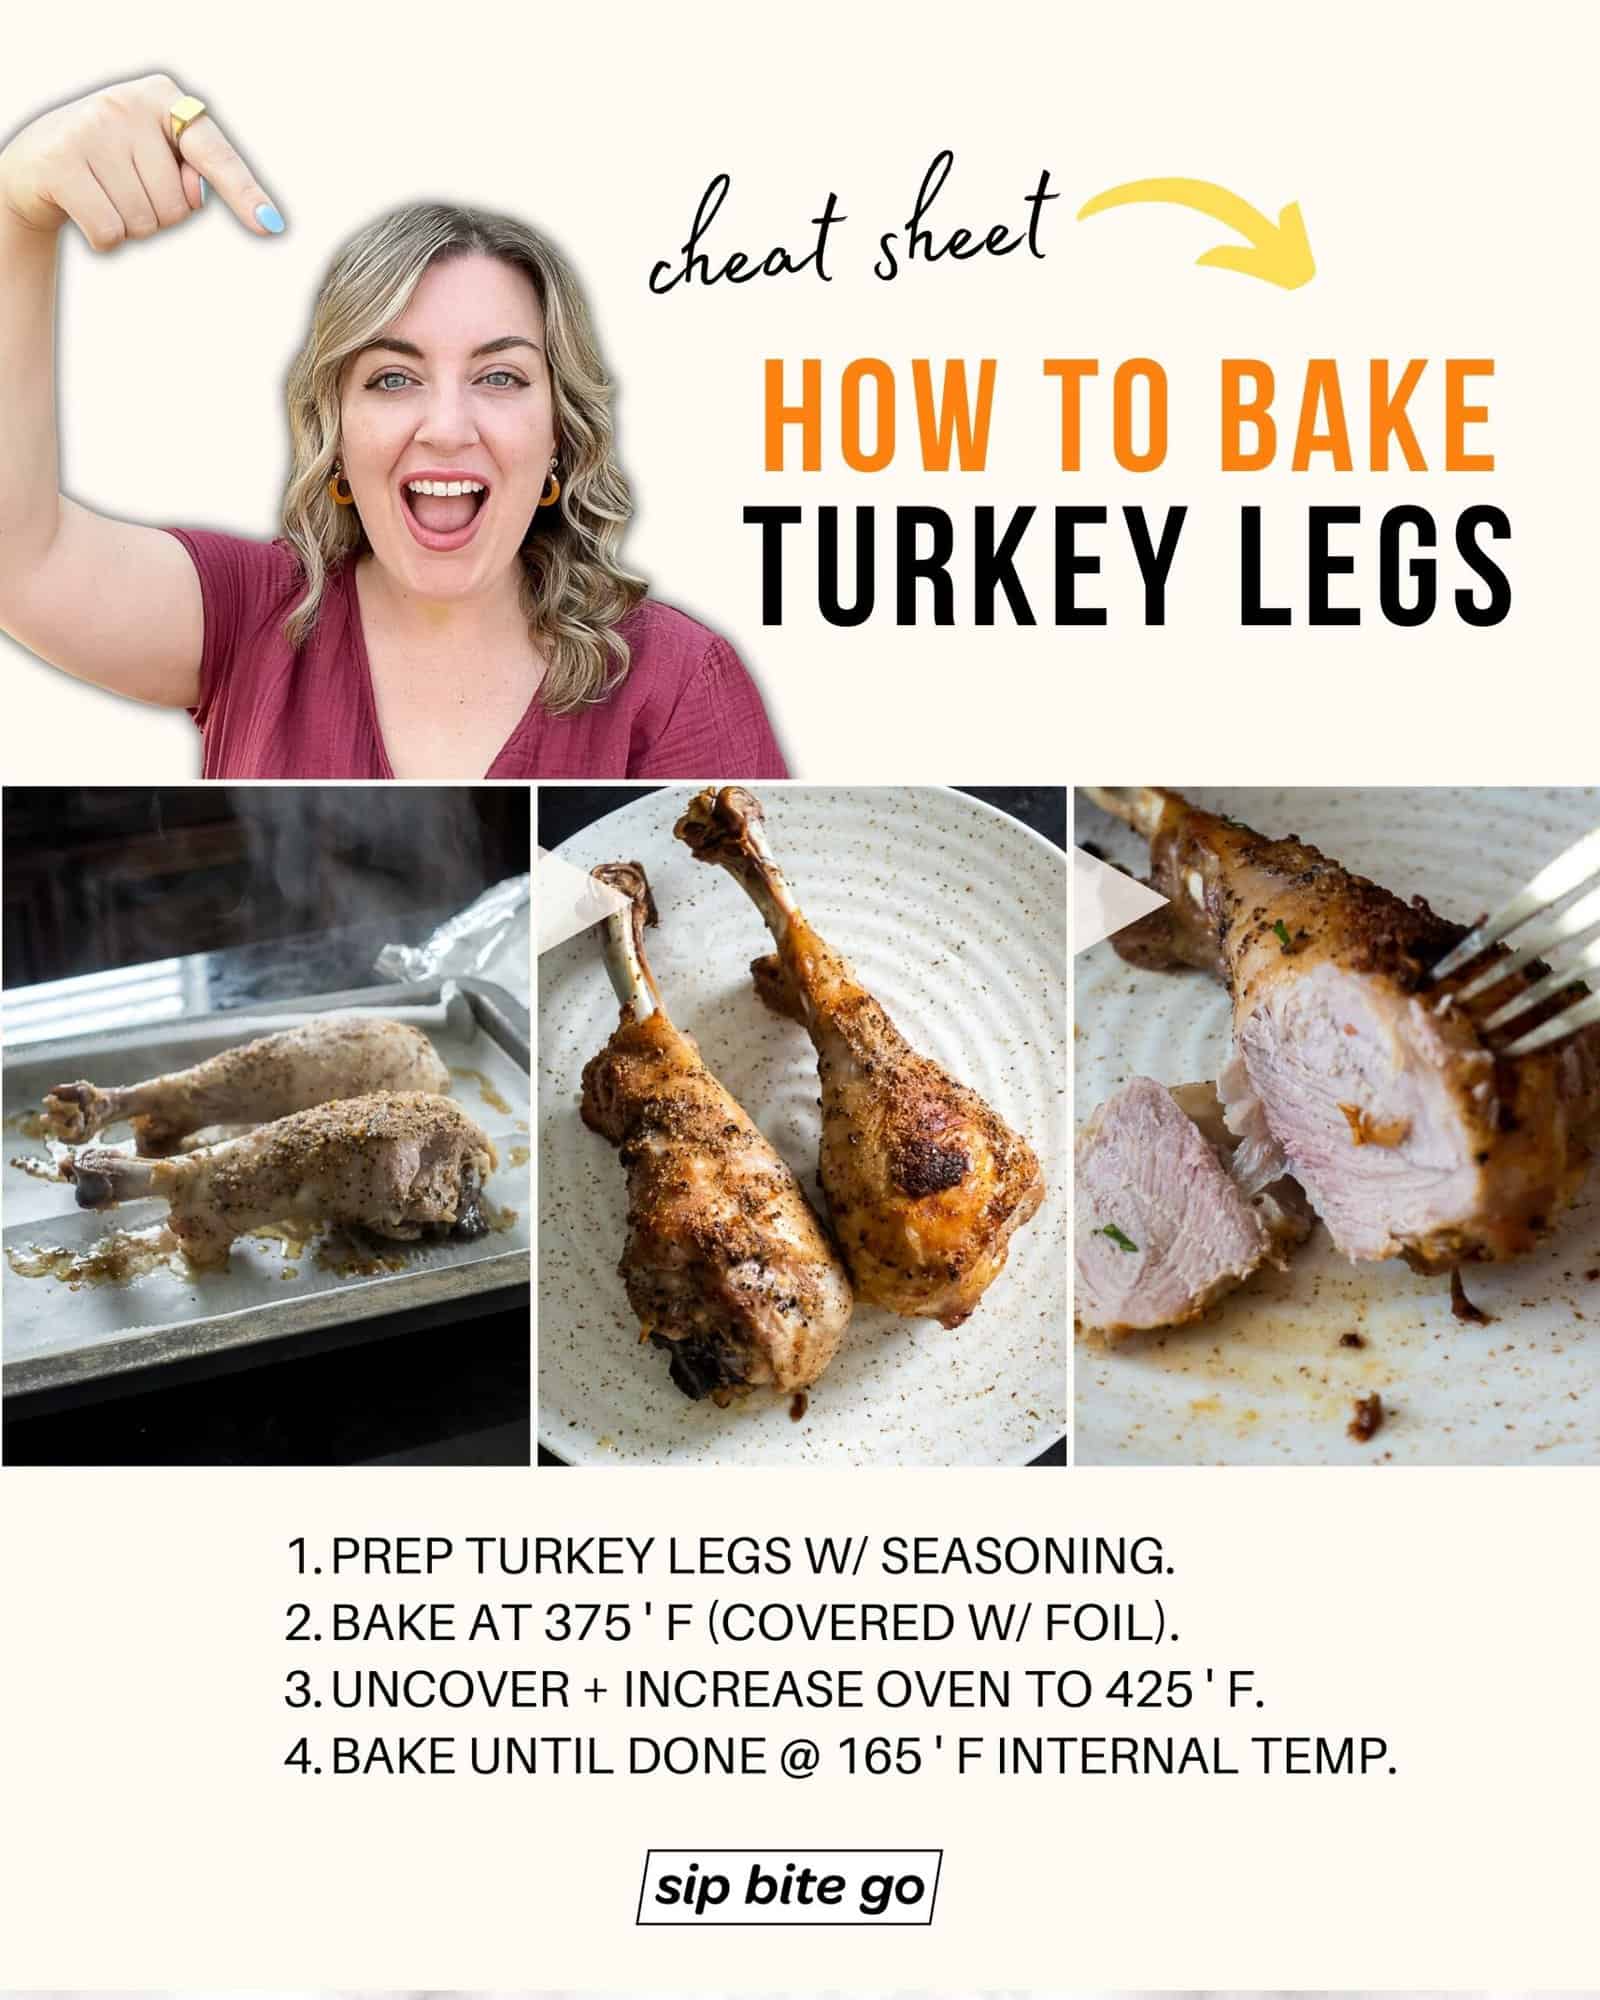 Infographic demonstrating how to bake turkey legs in oven with BBQ rub with Jenna Passaro and logo from Sip Bite Go